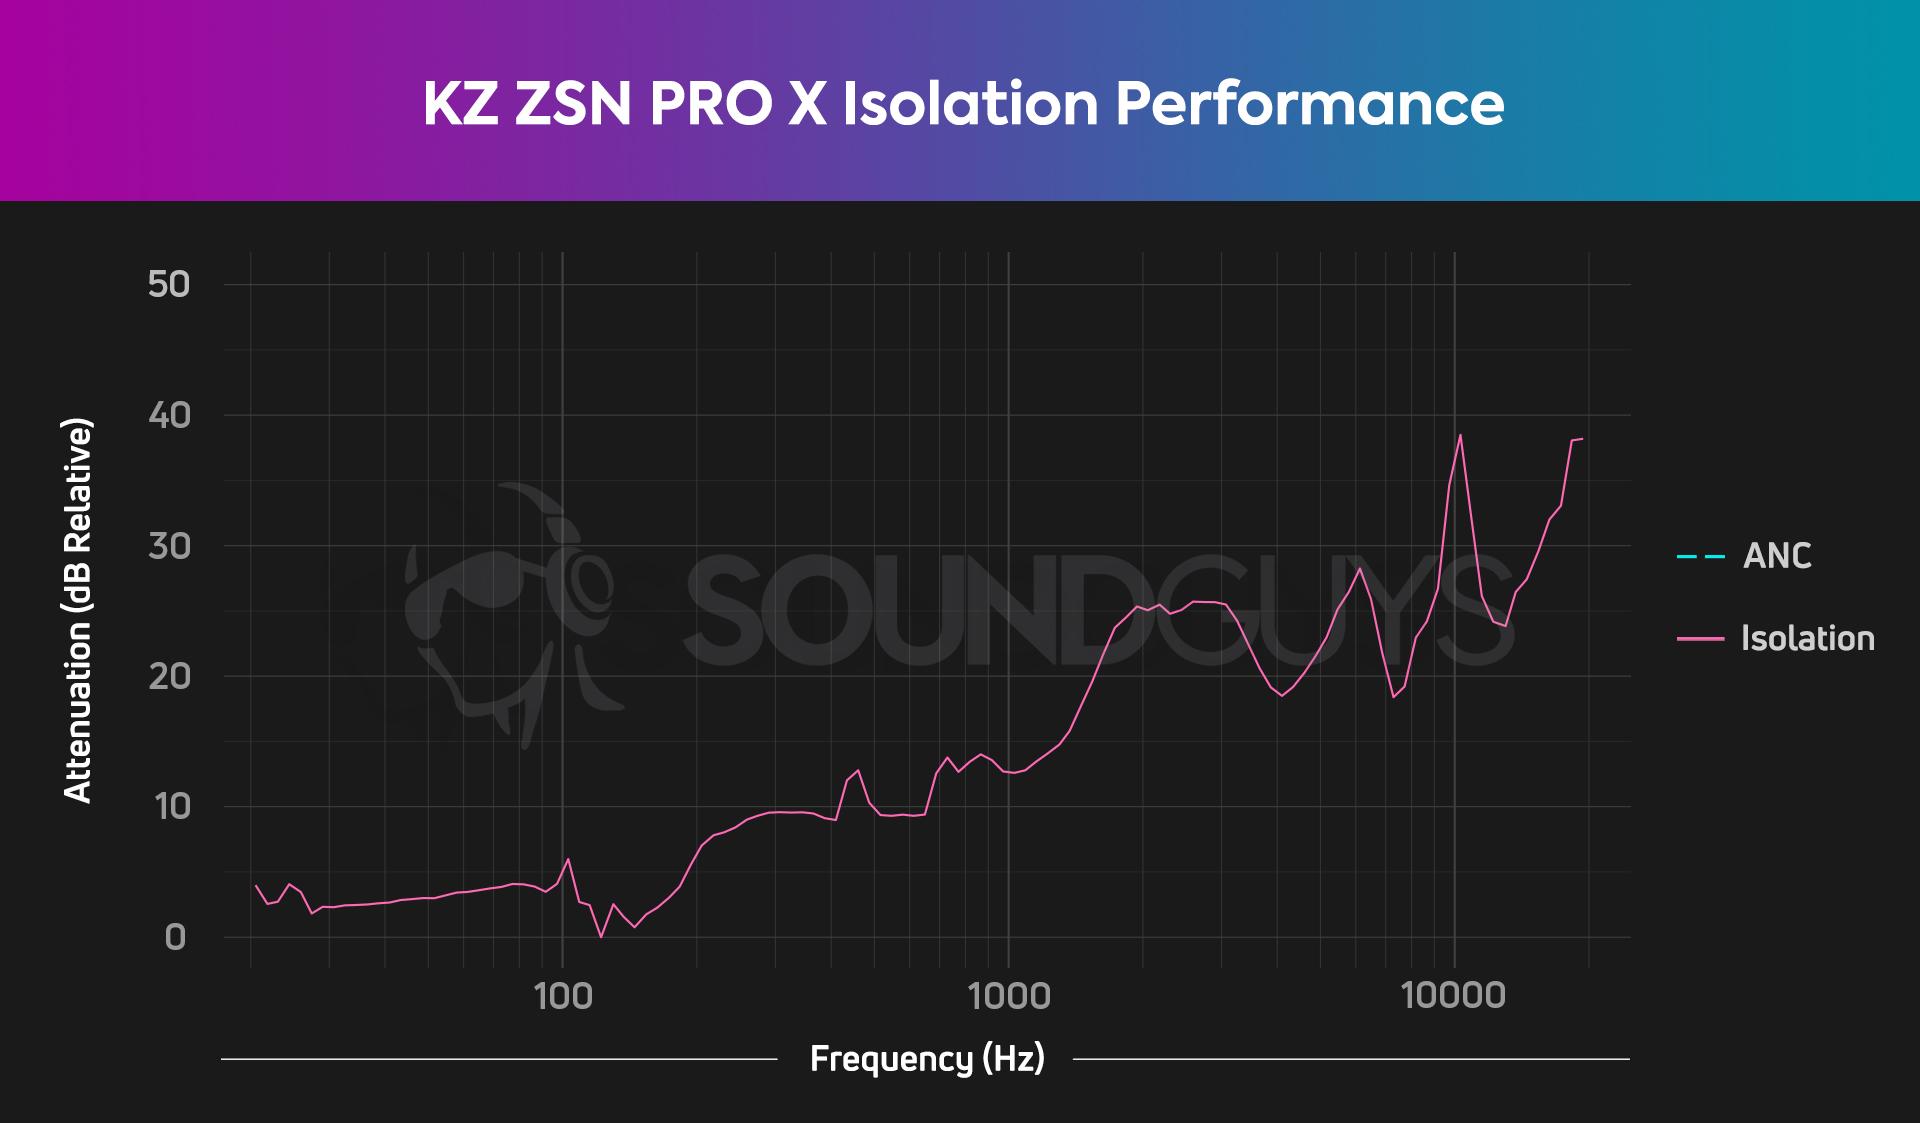 Chart depicts the isolation performance of the KZ ZSN PRO X.